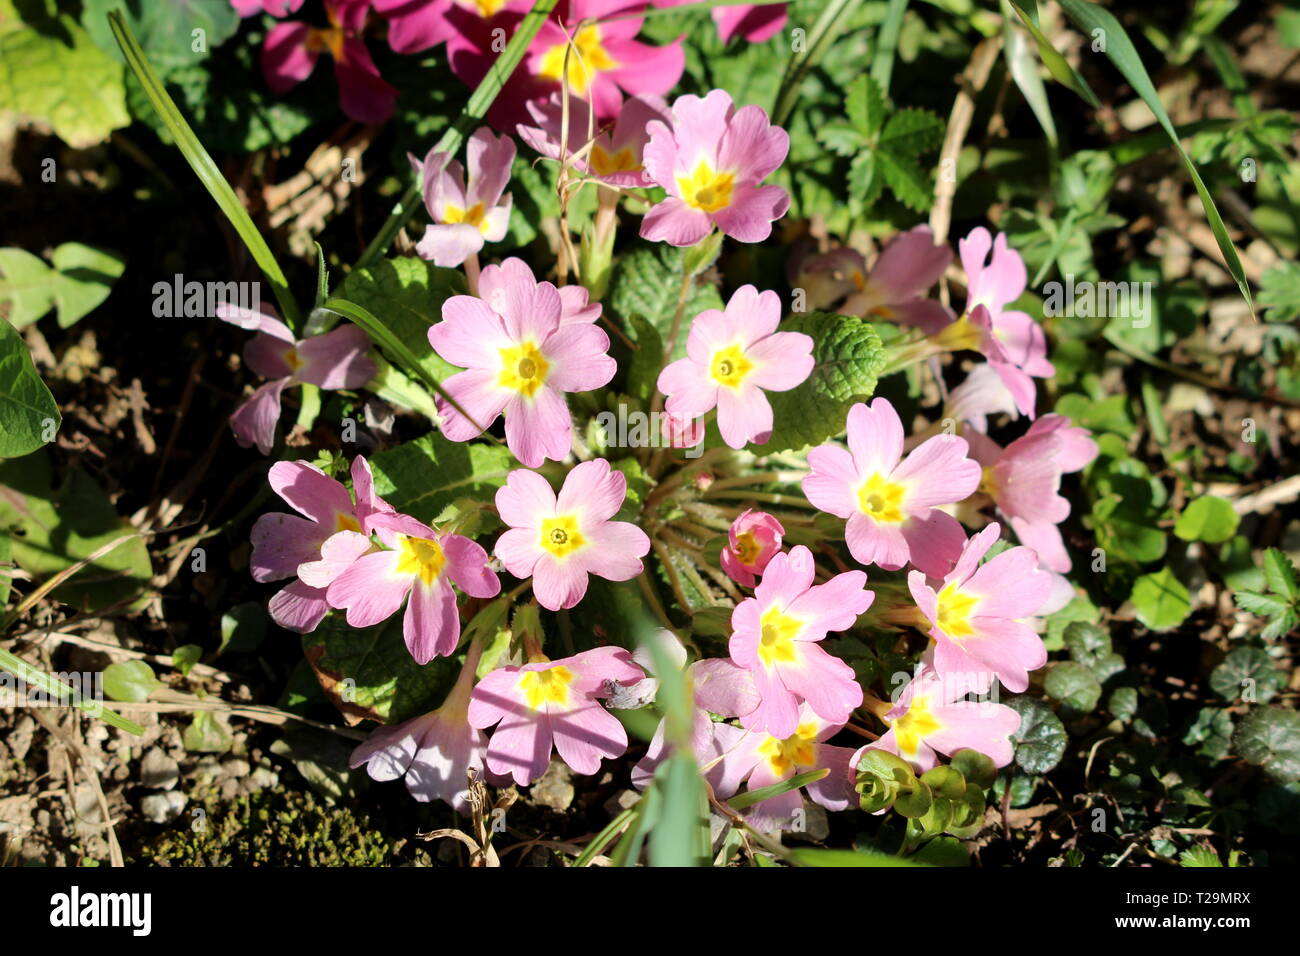 Light Pink Primrose Or Primula Vulgaris Or Common Primrose Or English Primrose Small Flowers With Yellow Center And Thick Dark Green Leaves Stock Photo Alamy